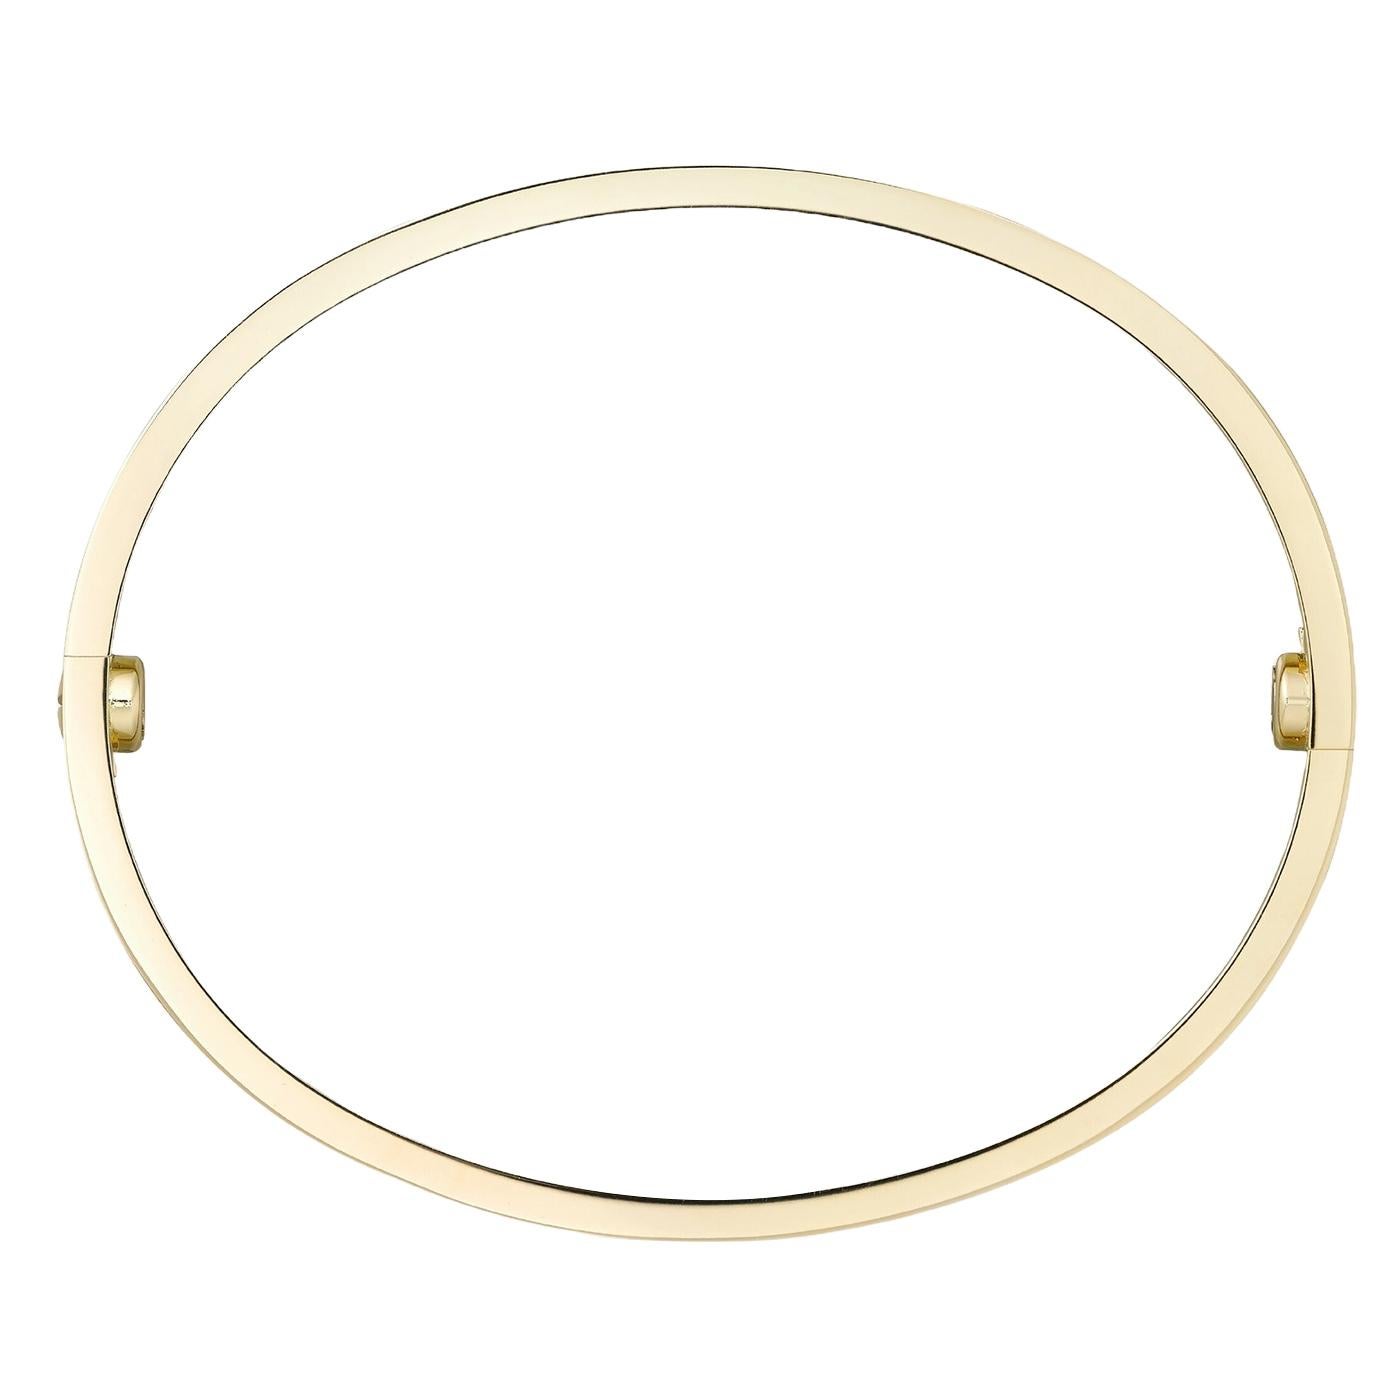 Cartier Love Bracelet 18K Yellow Gold Size 15 Brushed Finish with Screwdriver In Excellent Condition For Sale In Aventura, FL